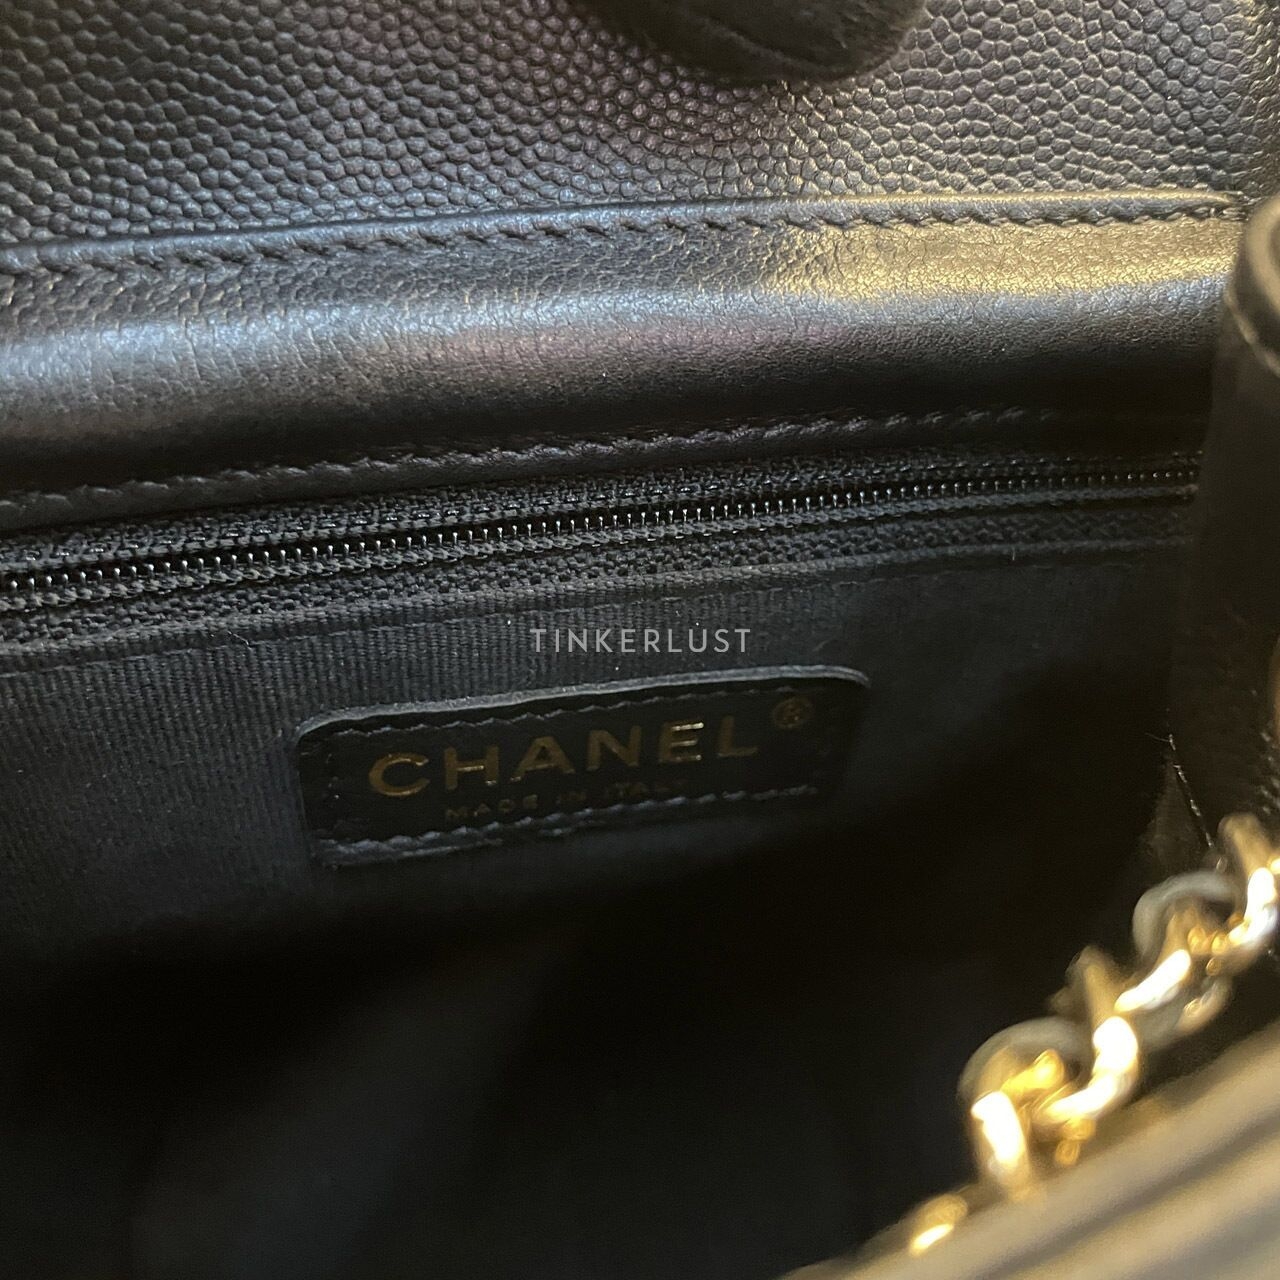 Chanel Two-Pocket Black Caviar GHW Backpack